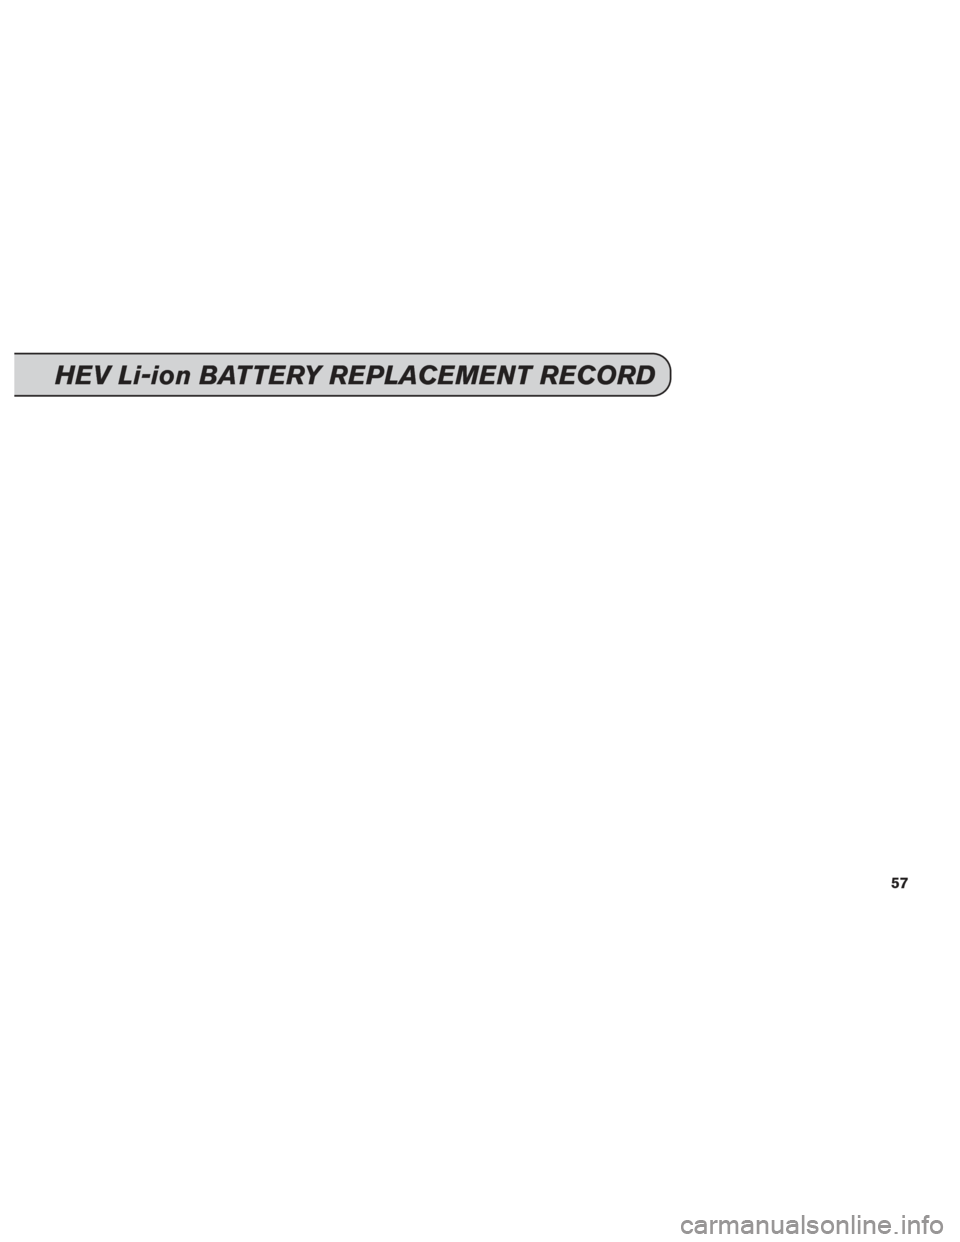 NISSAN MAXIMA 2014 A35 / 7.G Service And Maintenance Guide HEV Li-ion BATTERY REPLACEMENT RECORD
57 